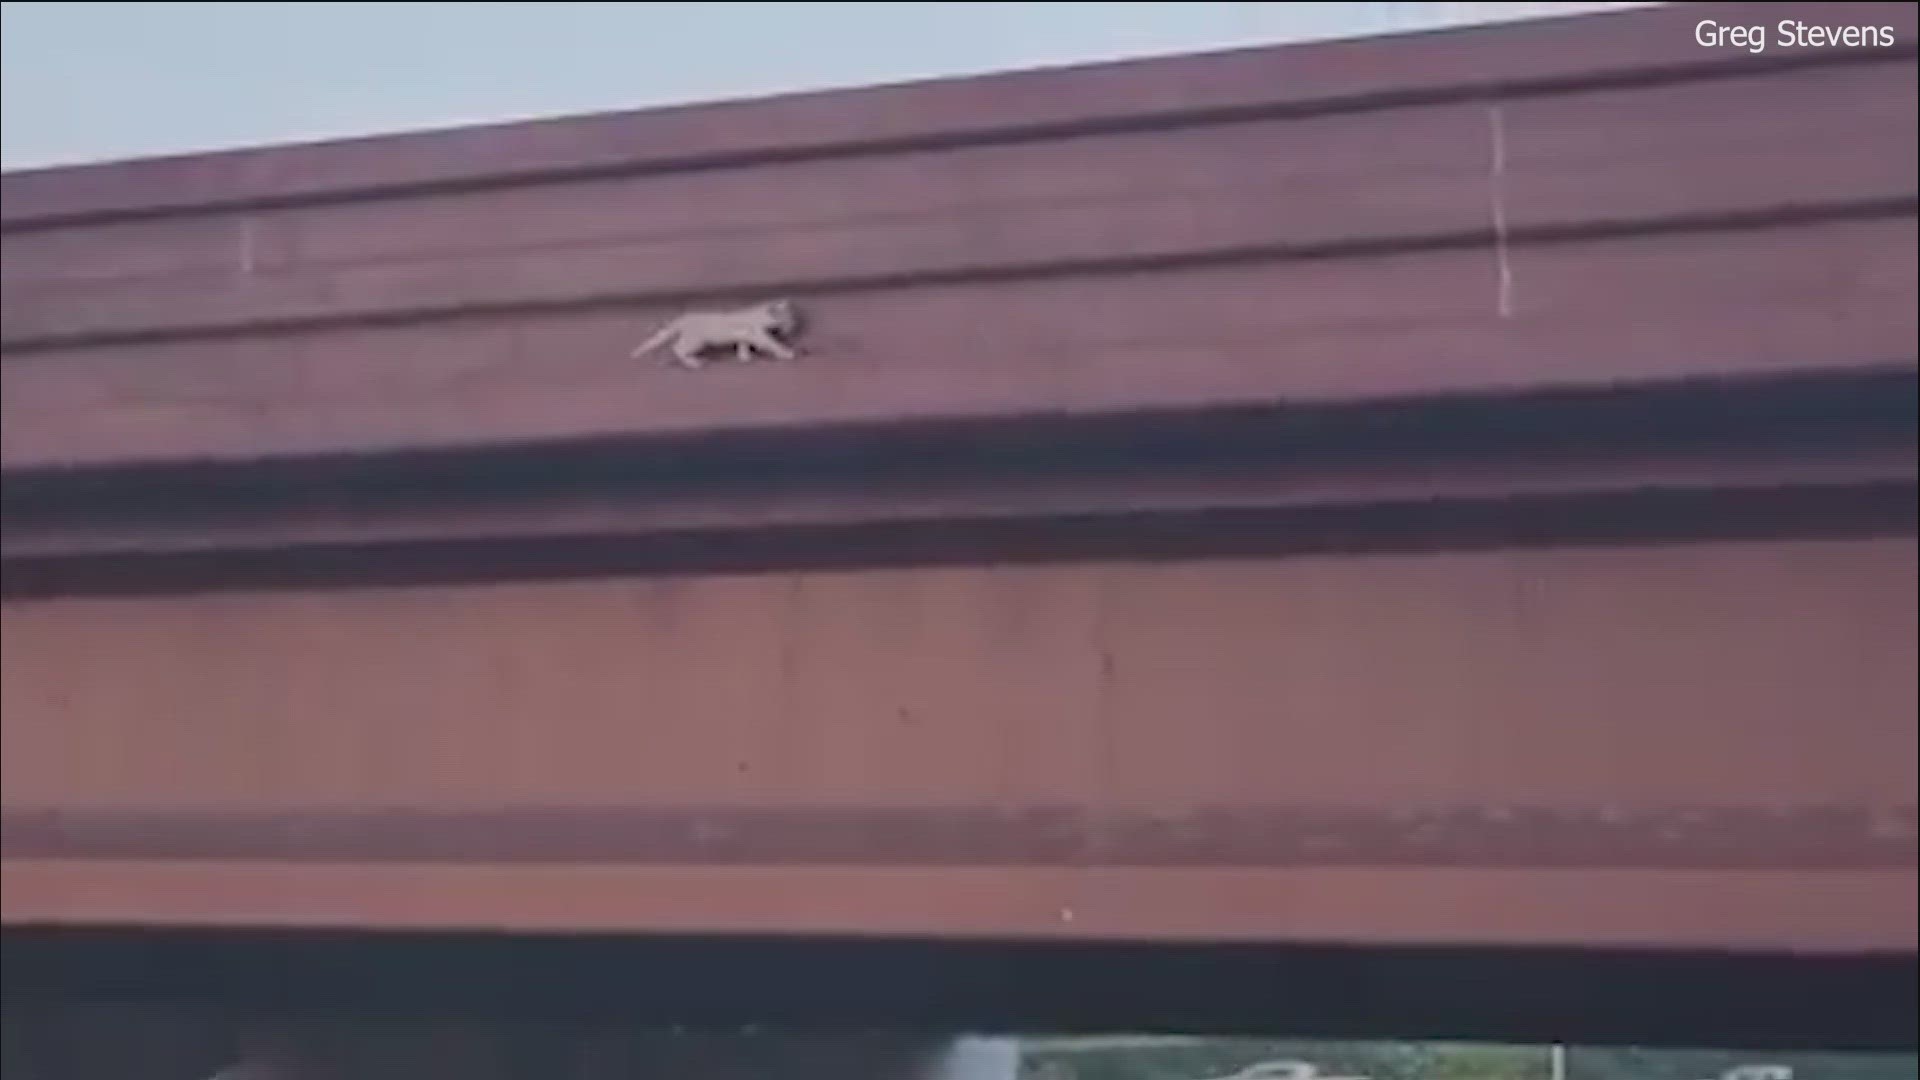 A feline rescue was caught on camera. A KVUE view spotted a kitten in a dangerous spot on the Montopolis bridge and decided to spring into action.